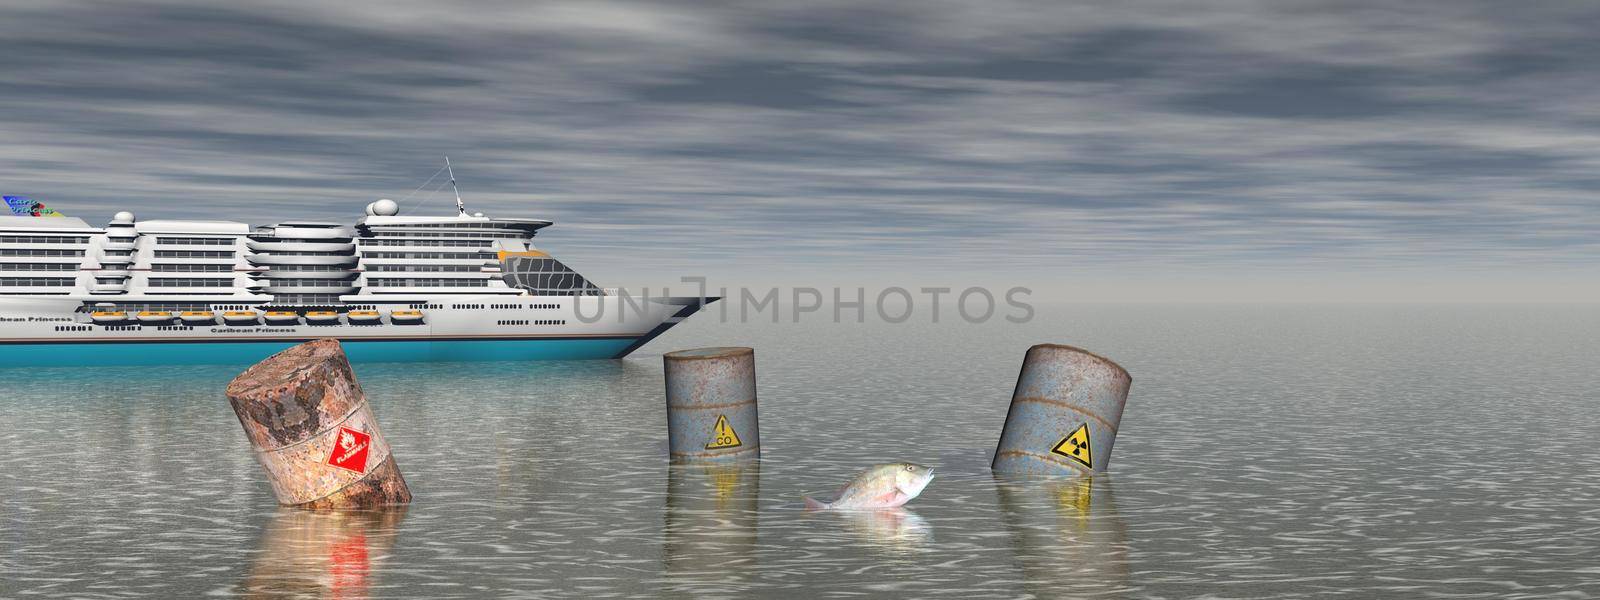 Pollution of the sea by ships - 3d rendering by mariephotos